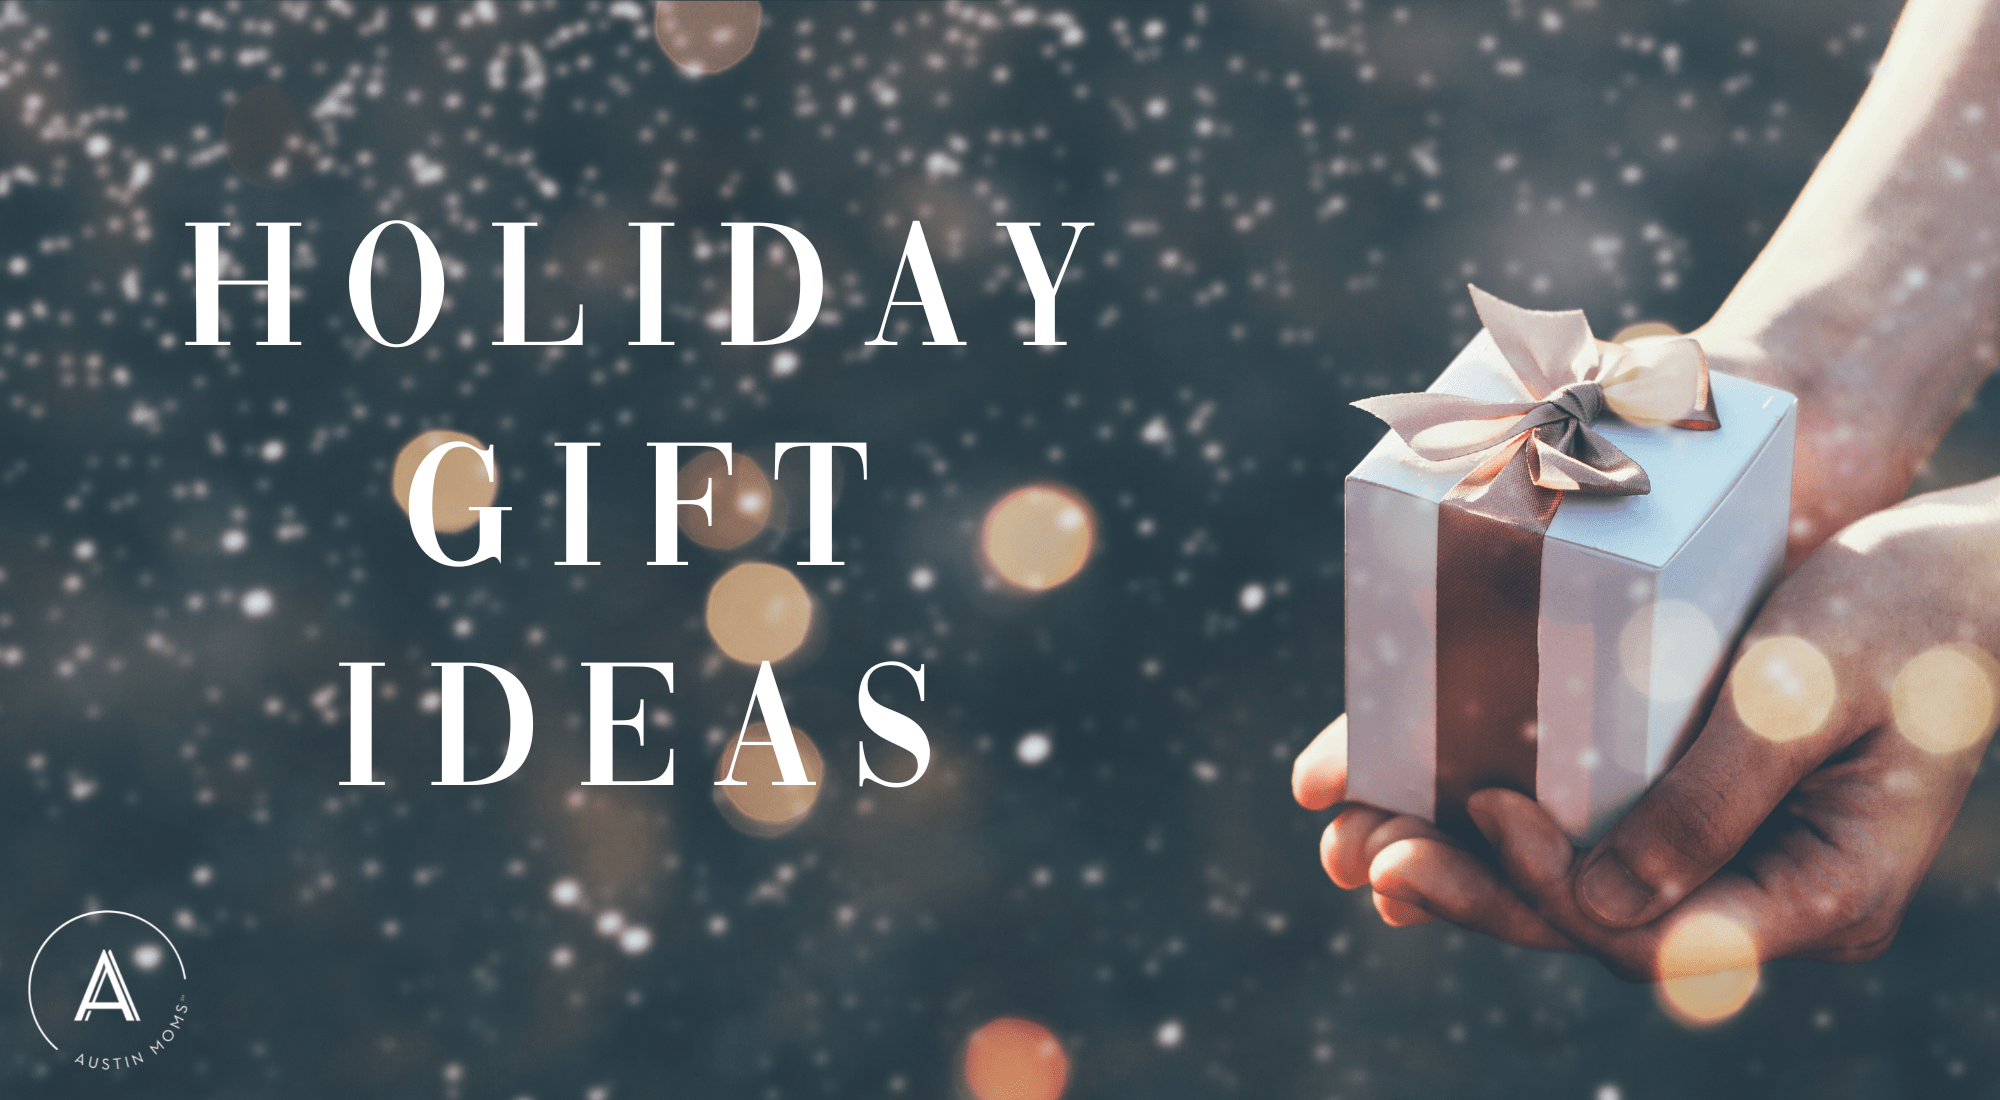 Austin's Ultimate Holiday Gift Guide